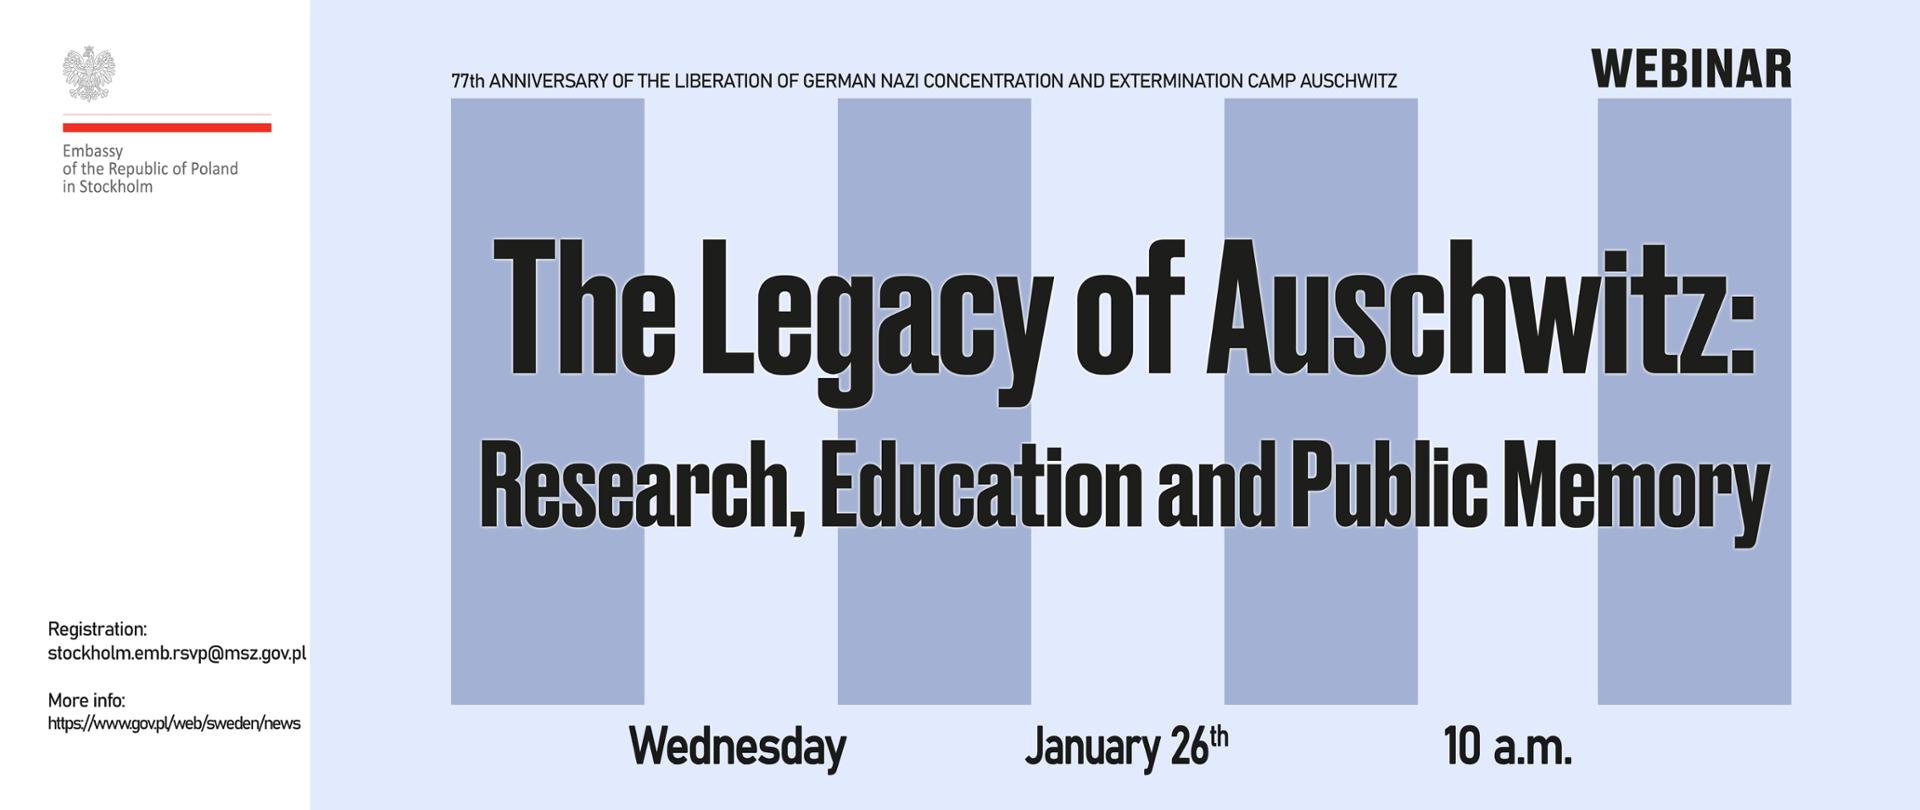 Webinar the Legacy of Auschwitz: Research, Education and Public Memory